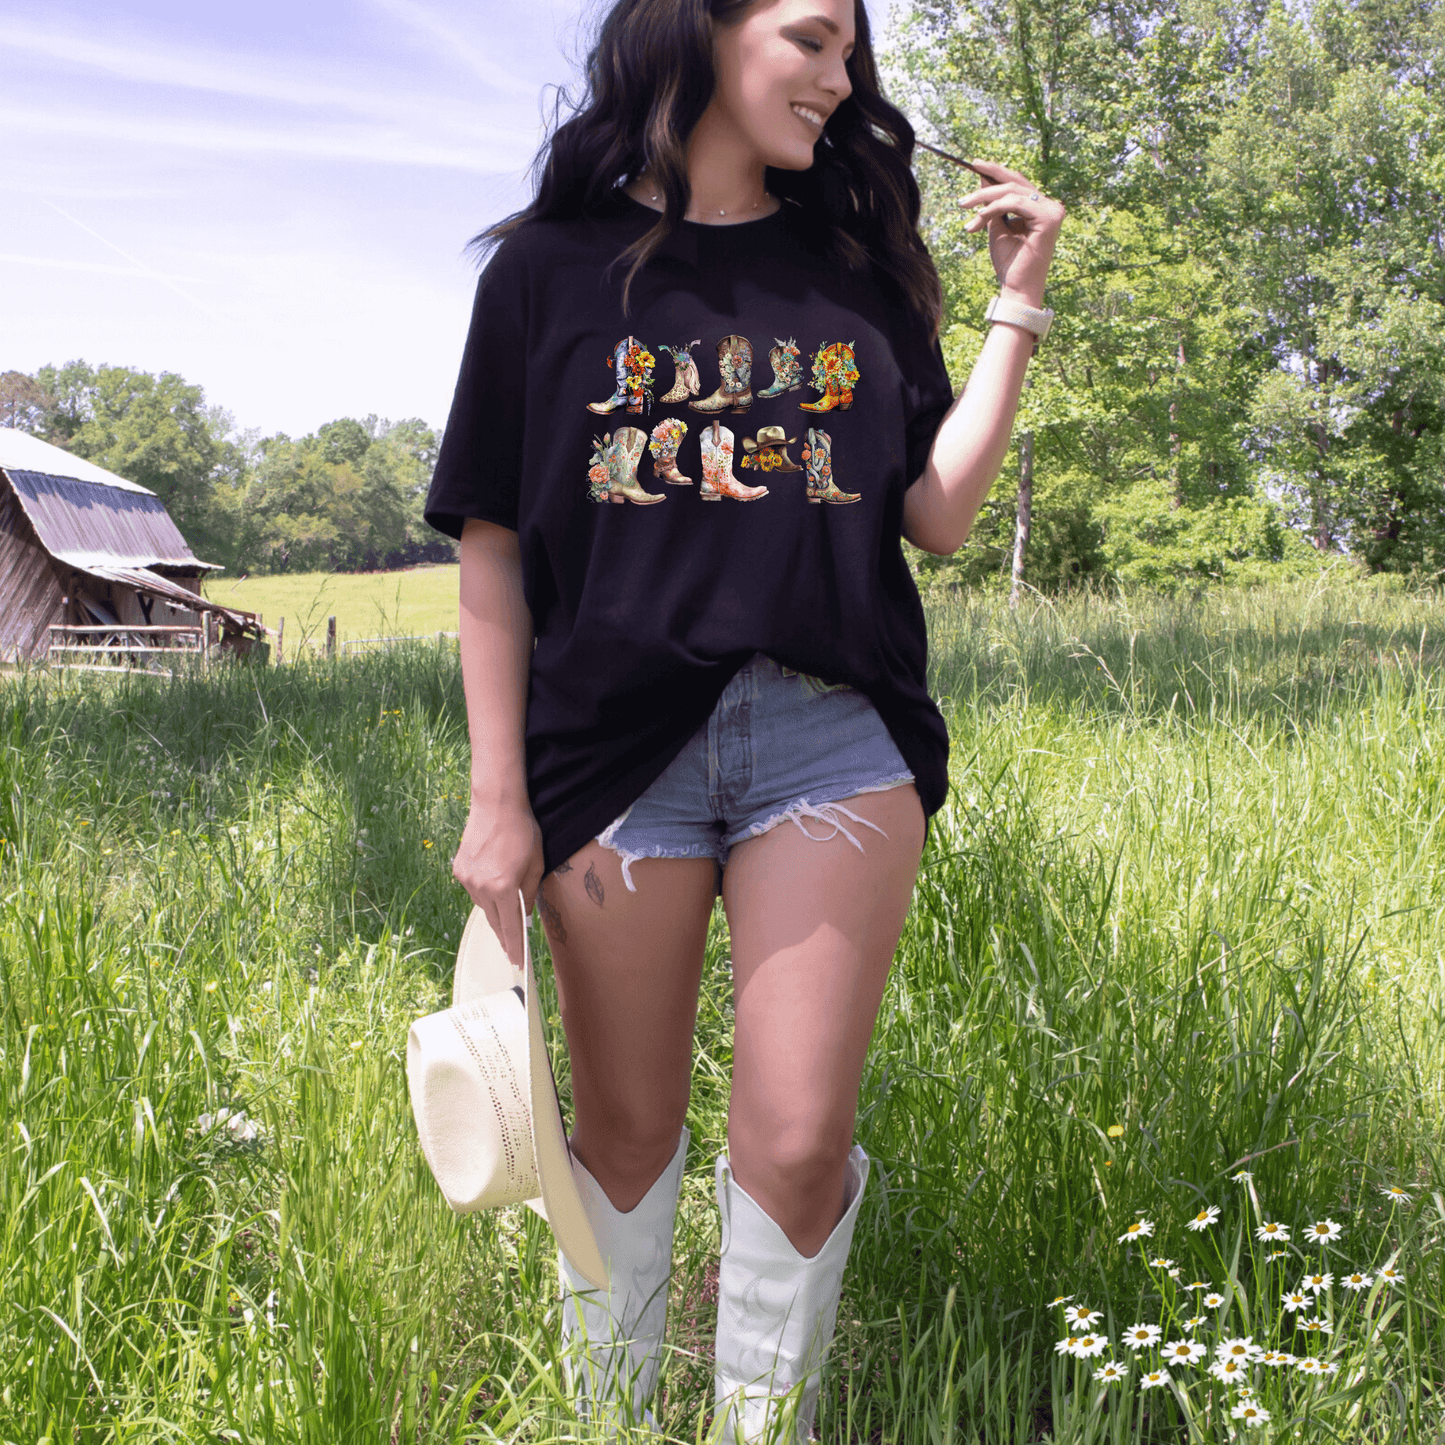 Cowgirl Boots Shirt, Texas -Inspired Western Graphic Tee For Women, Oversized Graphic Tee, Cute Country Shirts, Cowgirl Flower Shirt, Country Concert Tee